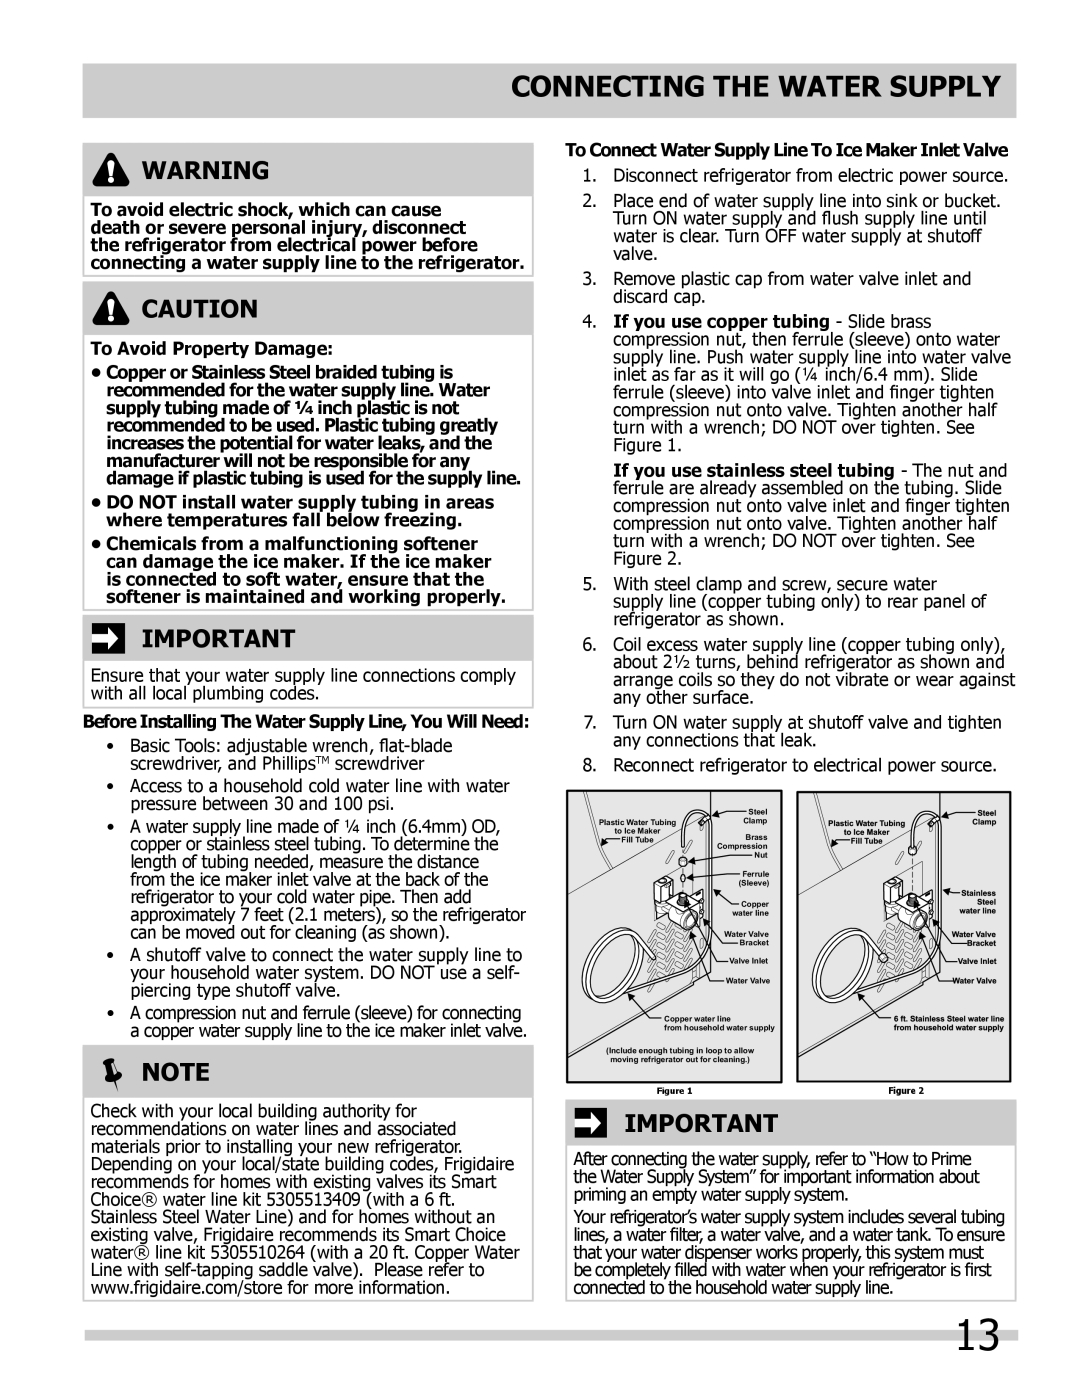 Frigidaire 242046800 important safety instructions Connecting the Water Supply, To Avoid Property Damage,  Note 